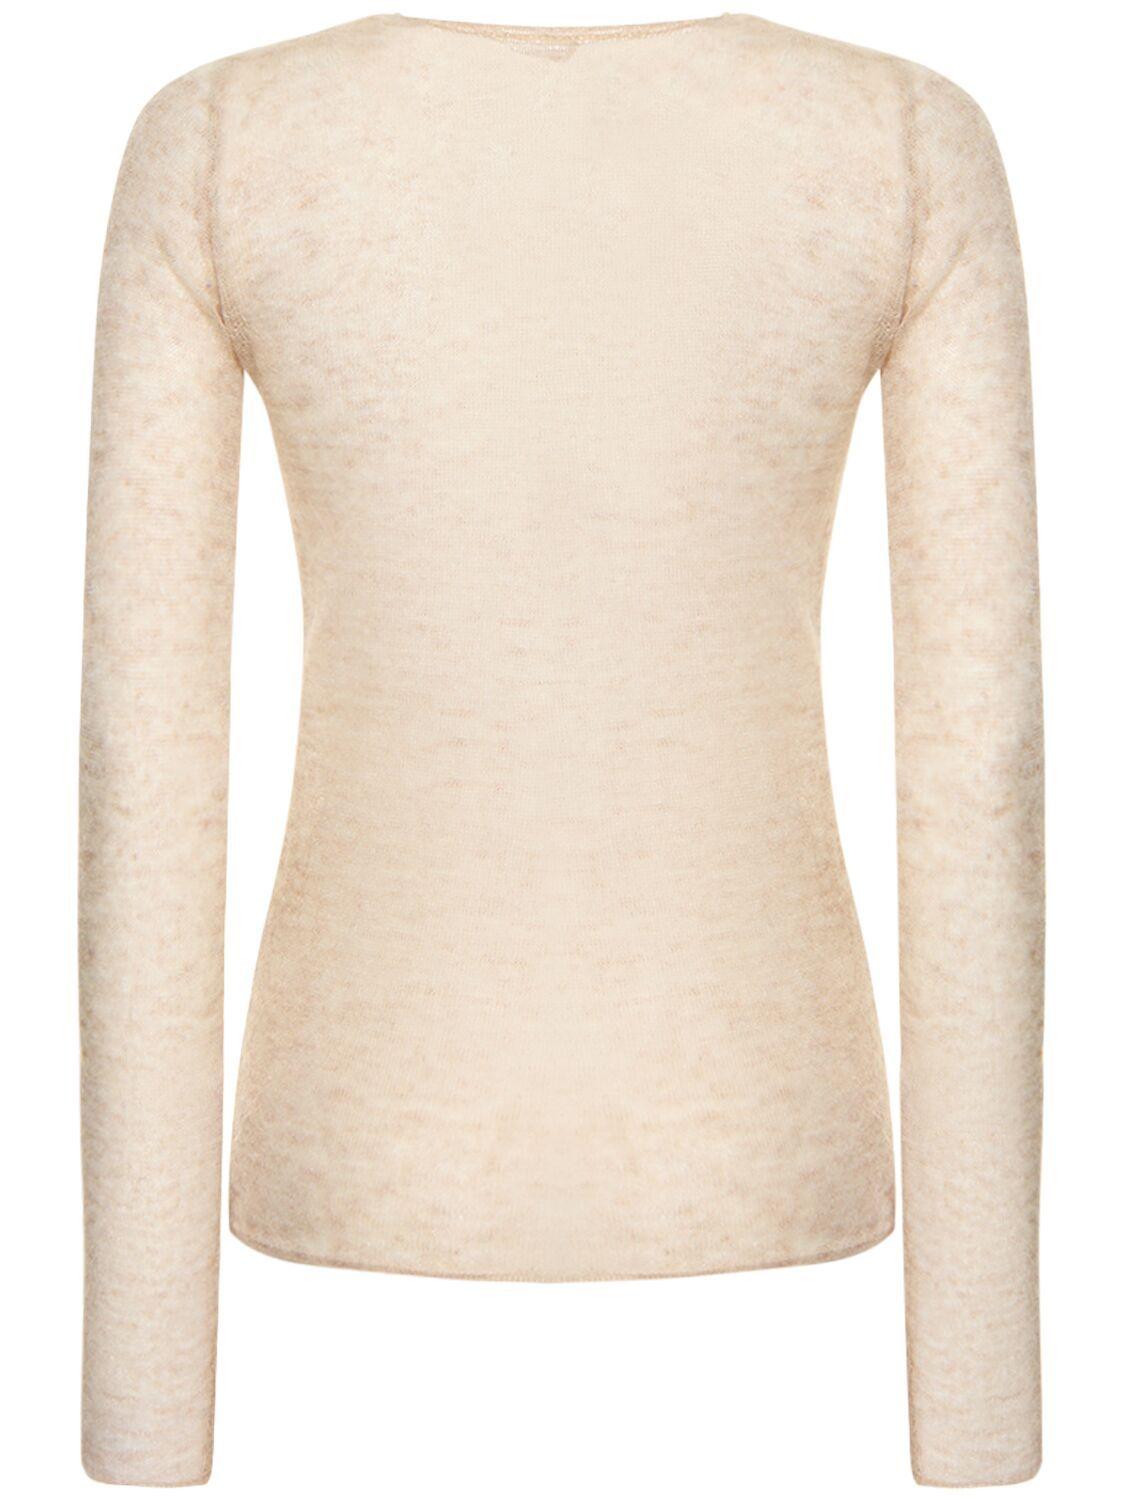 AURALEE Kid Mohair Sheer Knit Boatneck Sweater in Natural | Lyst